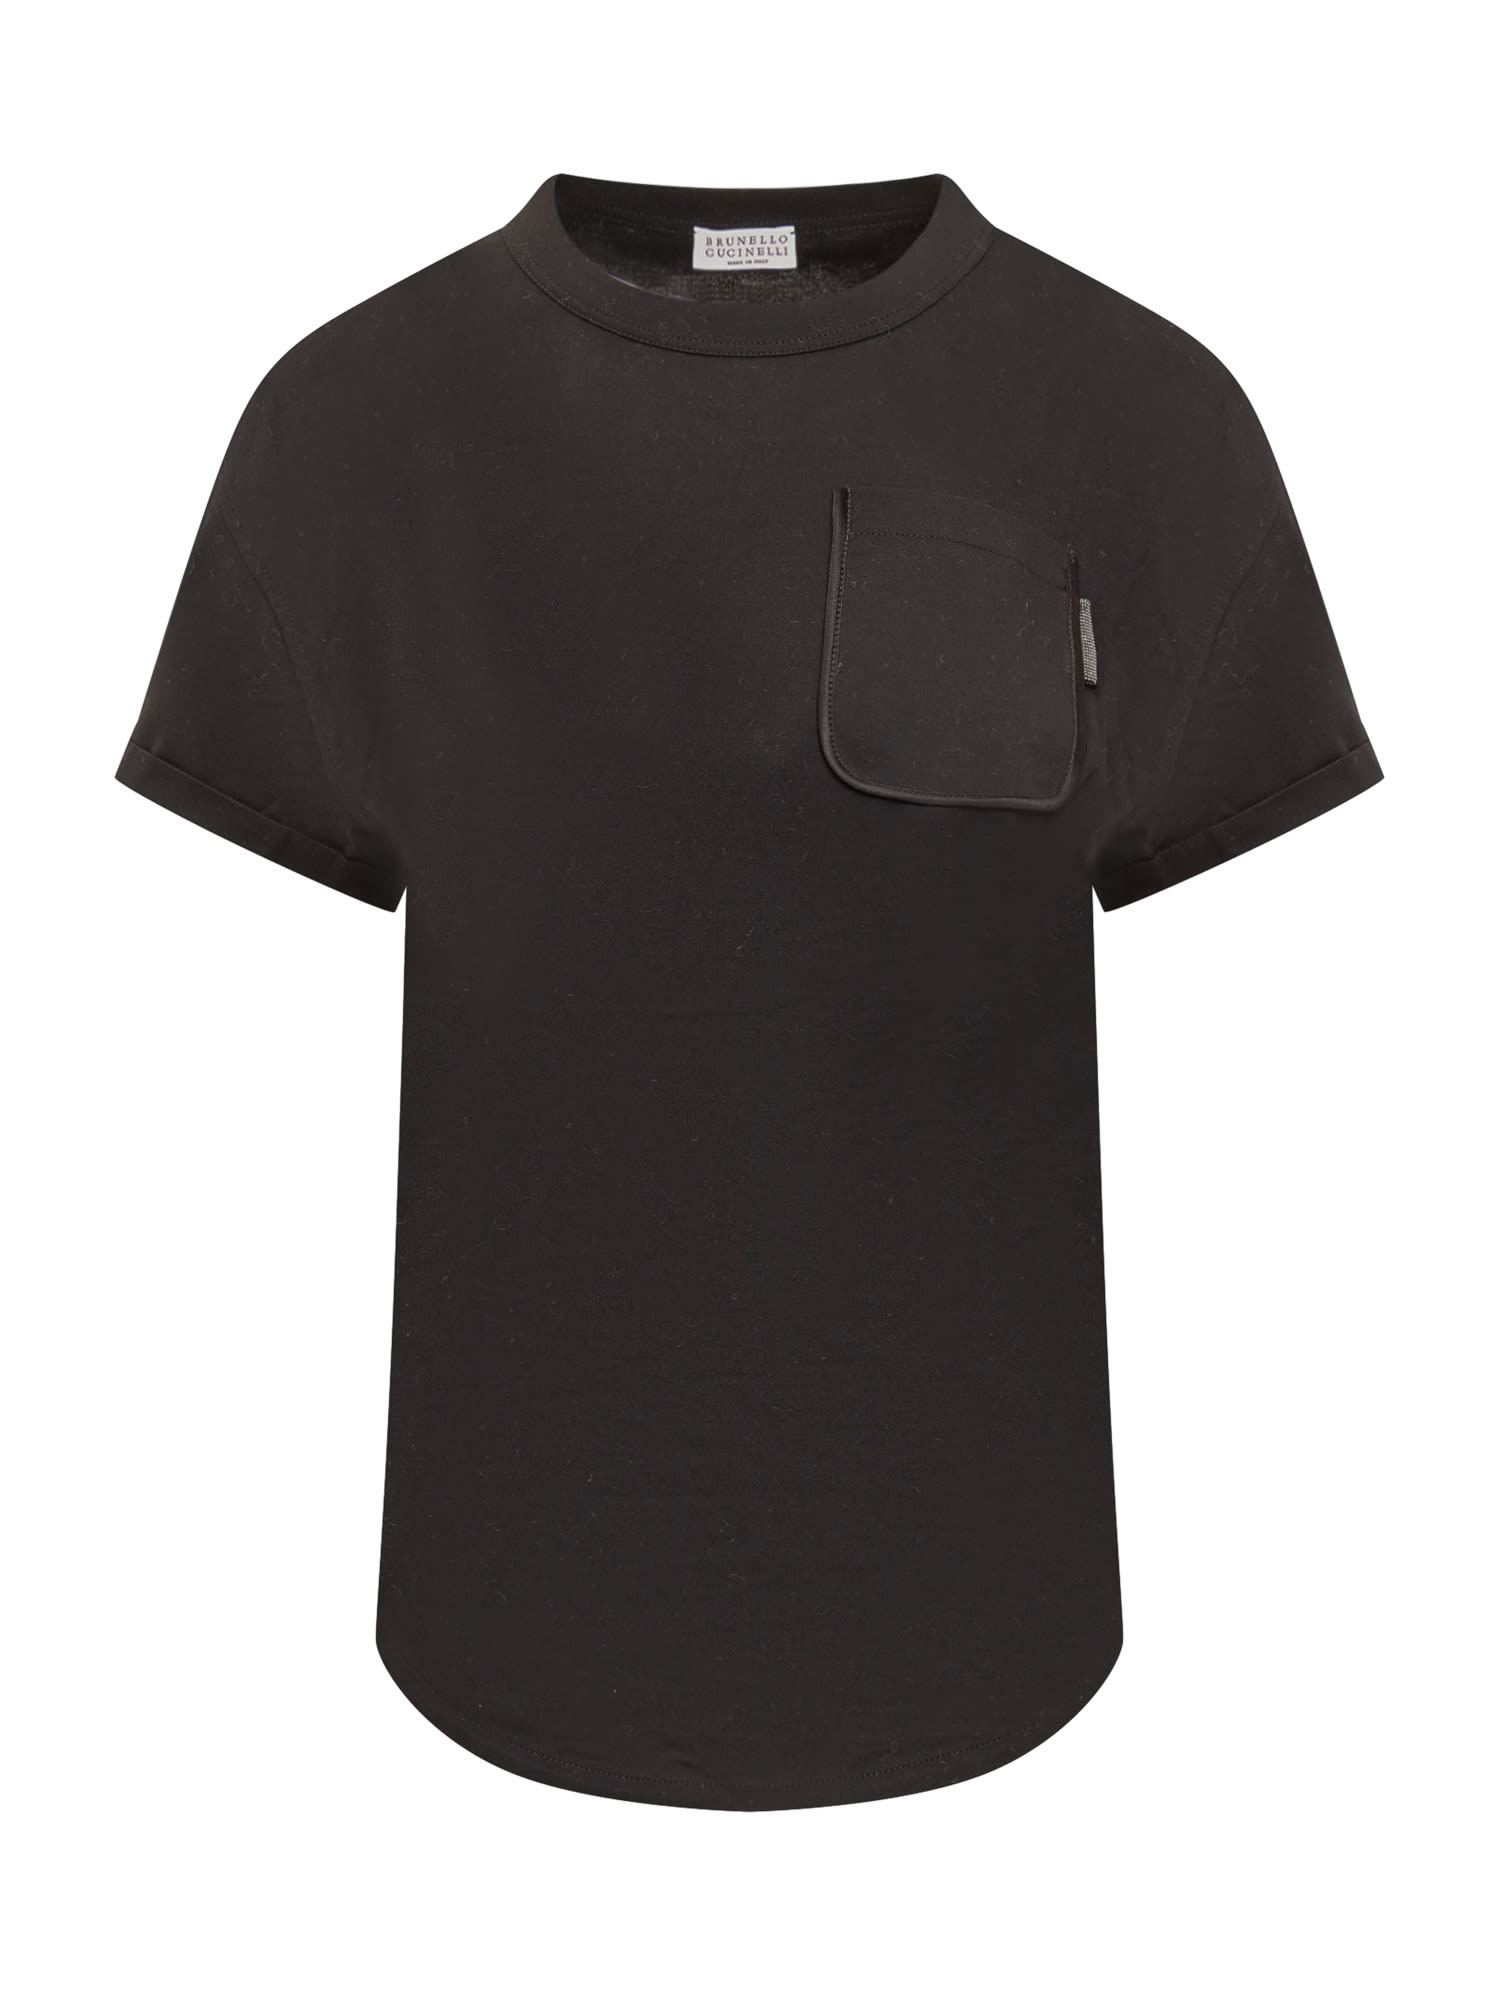 Cotton Jersey T-shirt With Shiny Tab